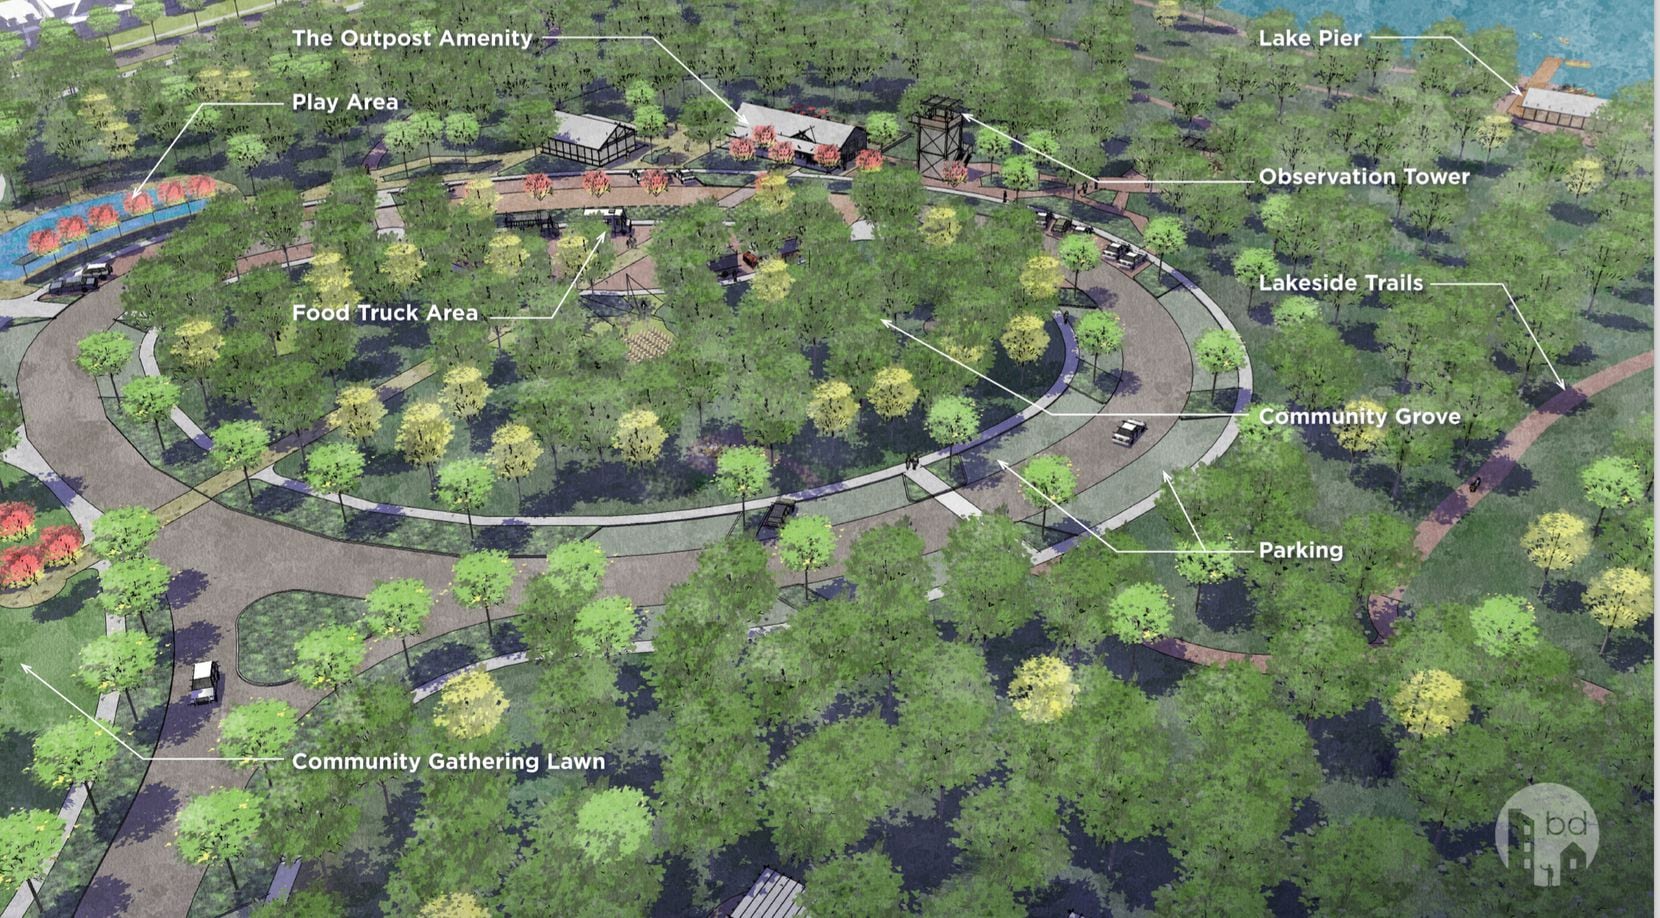 The 1,100-acre Painted Tree community in McKinney will include 25 miles of hiking and walking trails, a 200-acre greenbelt and a 20-acre lake.